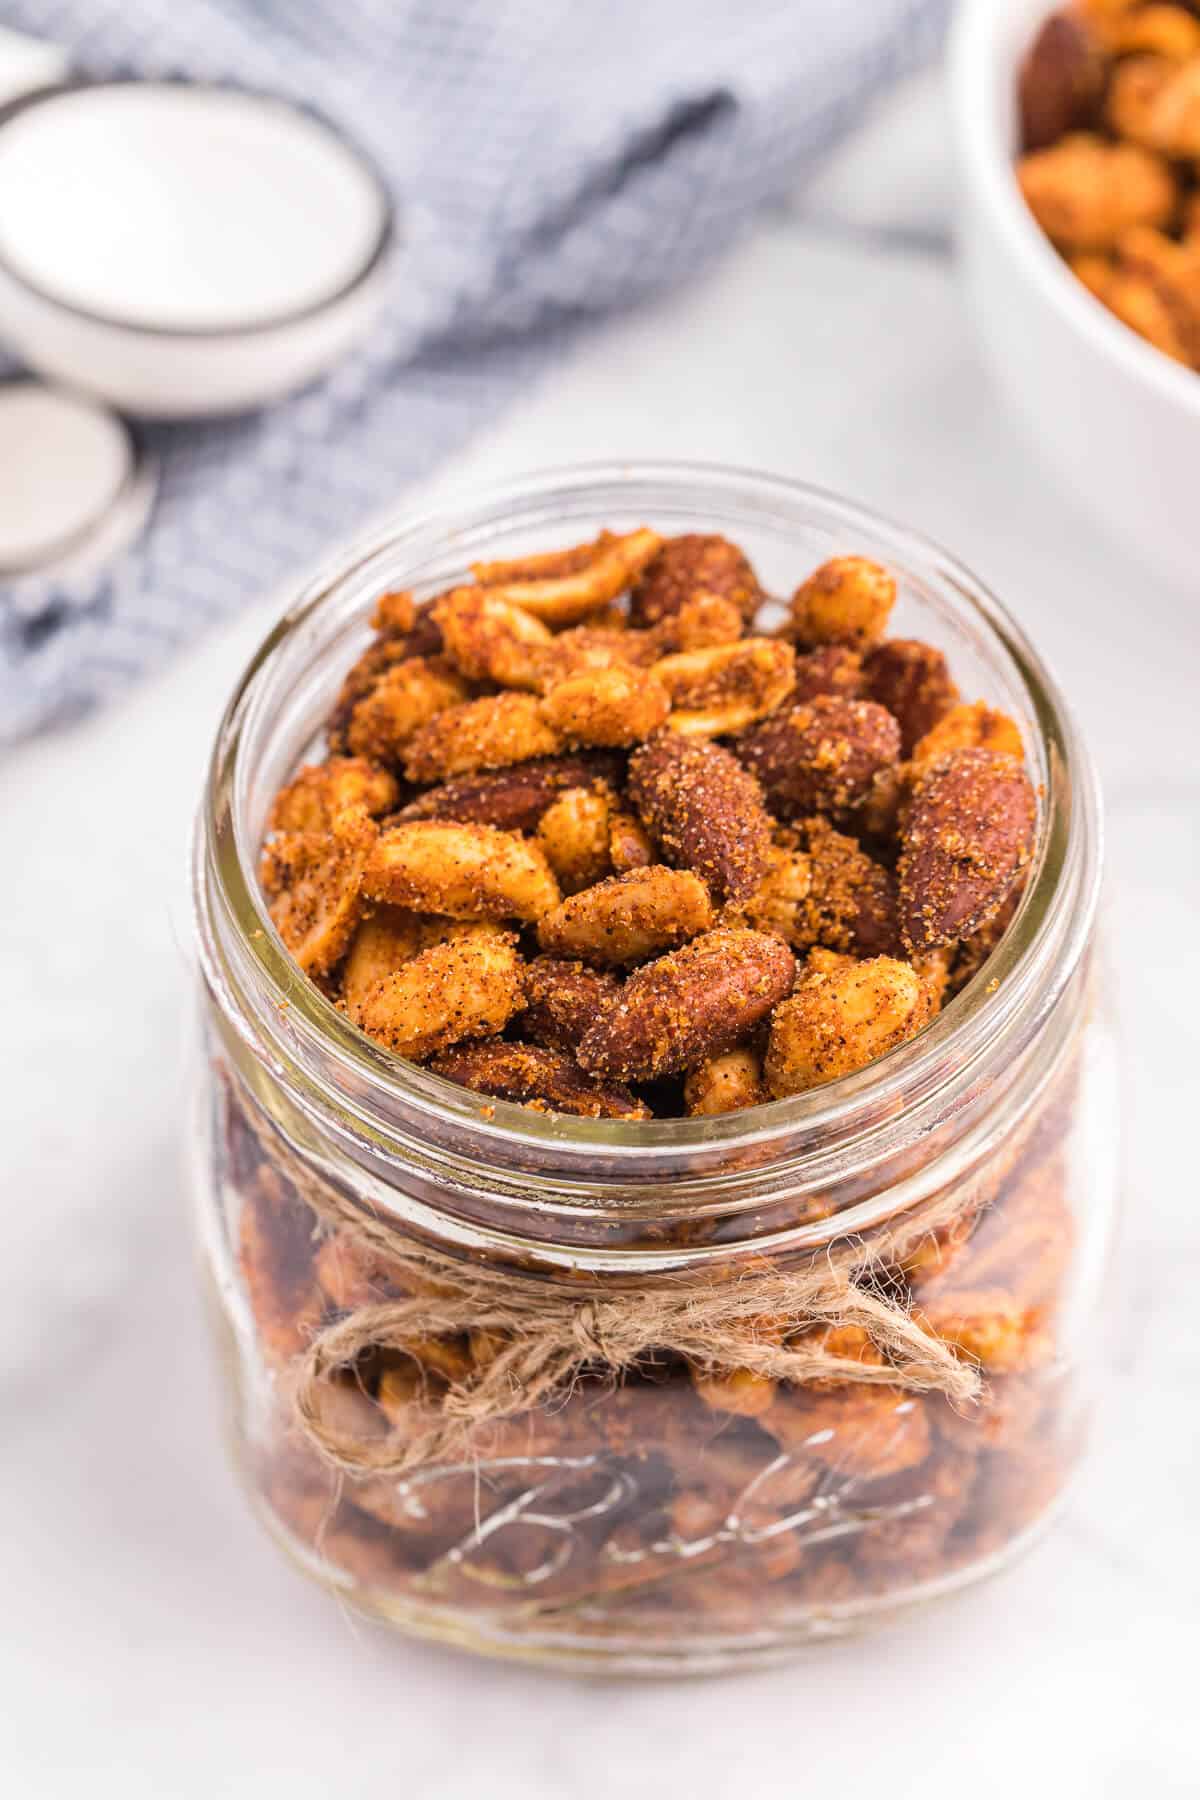 Southwestern Party Nuts Recipe - A dash of spice and hint of sweetness make for an addicting treat!